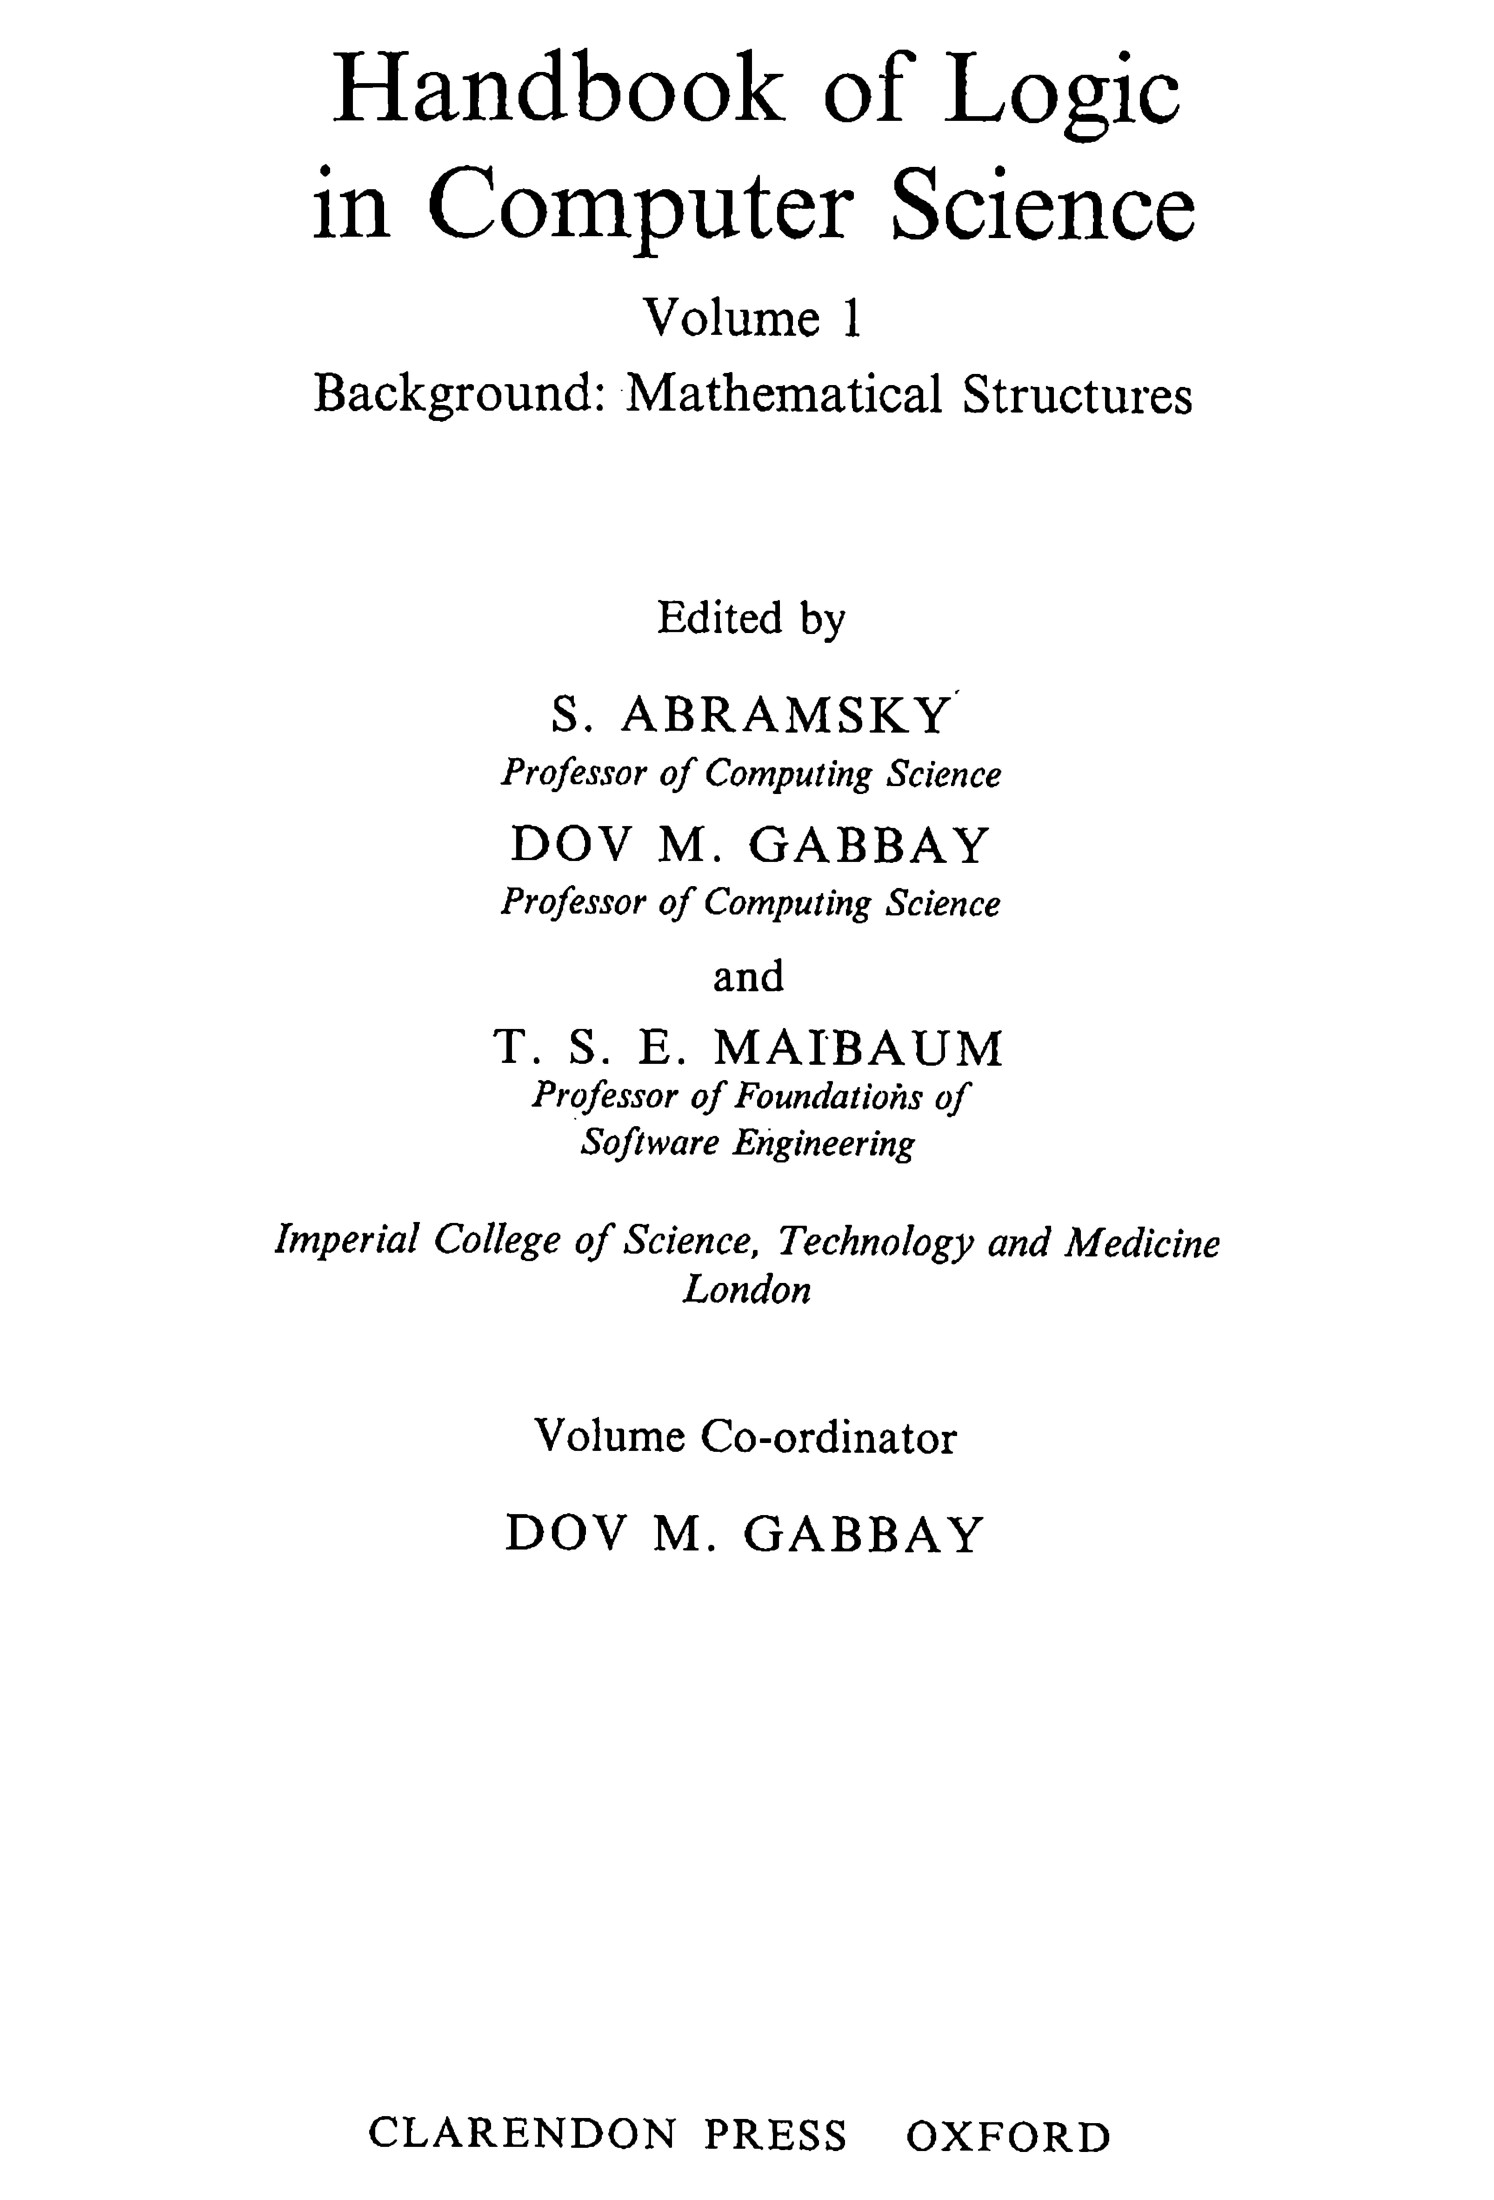 Handbook of Logic in Computer Science. Volume 1 Background Mathematical Structures